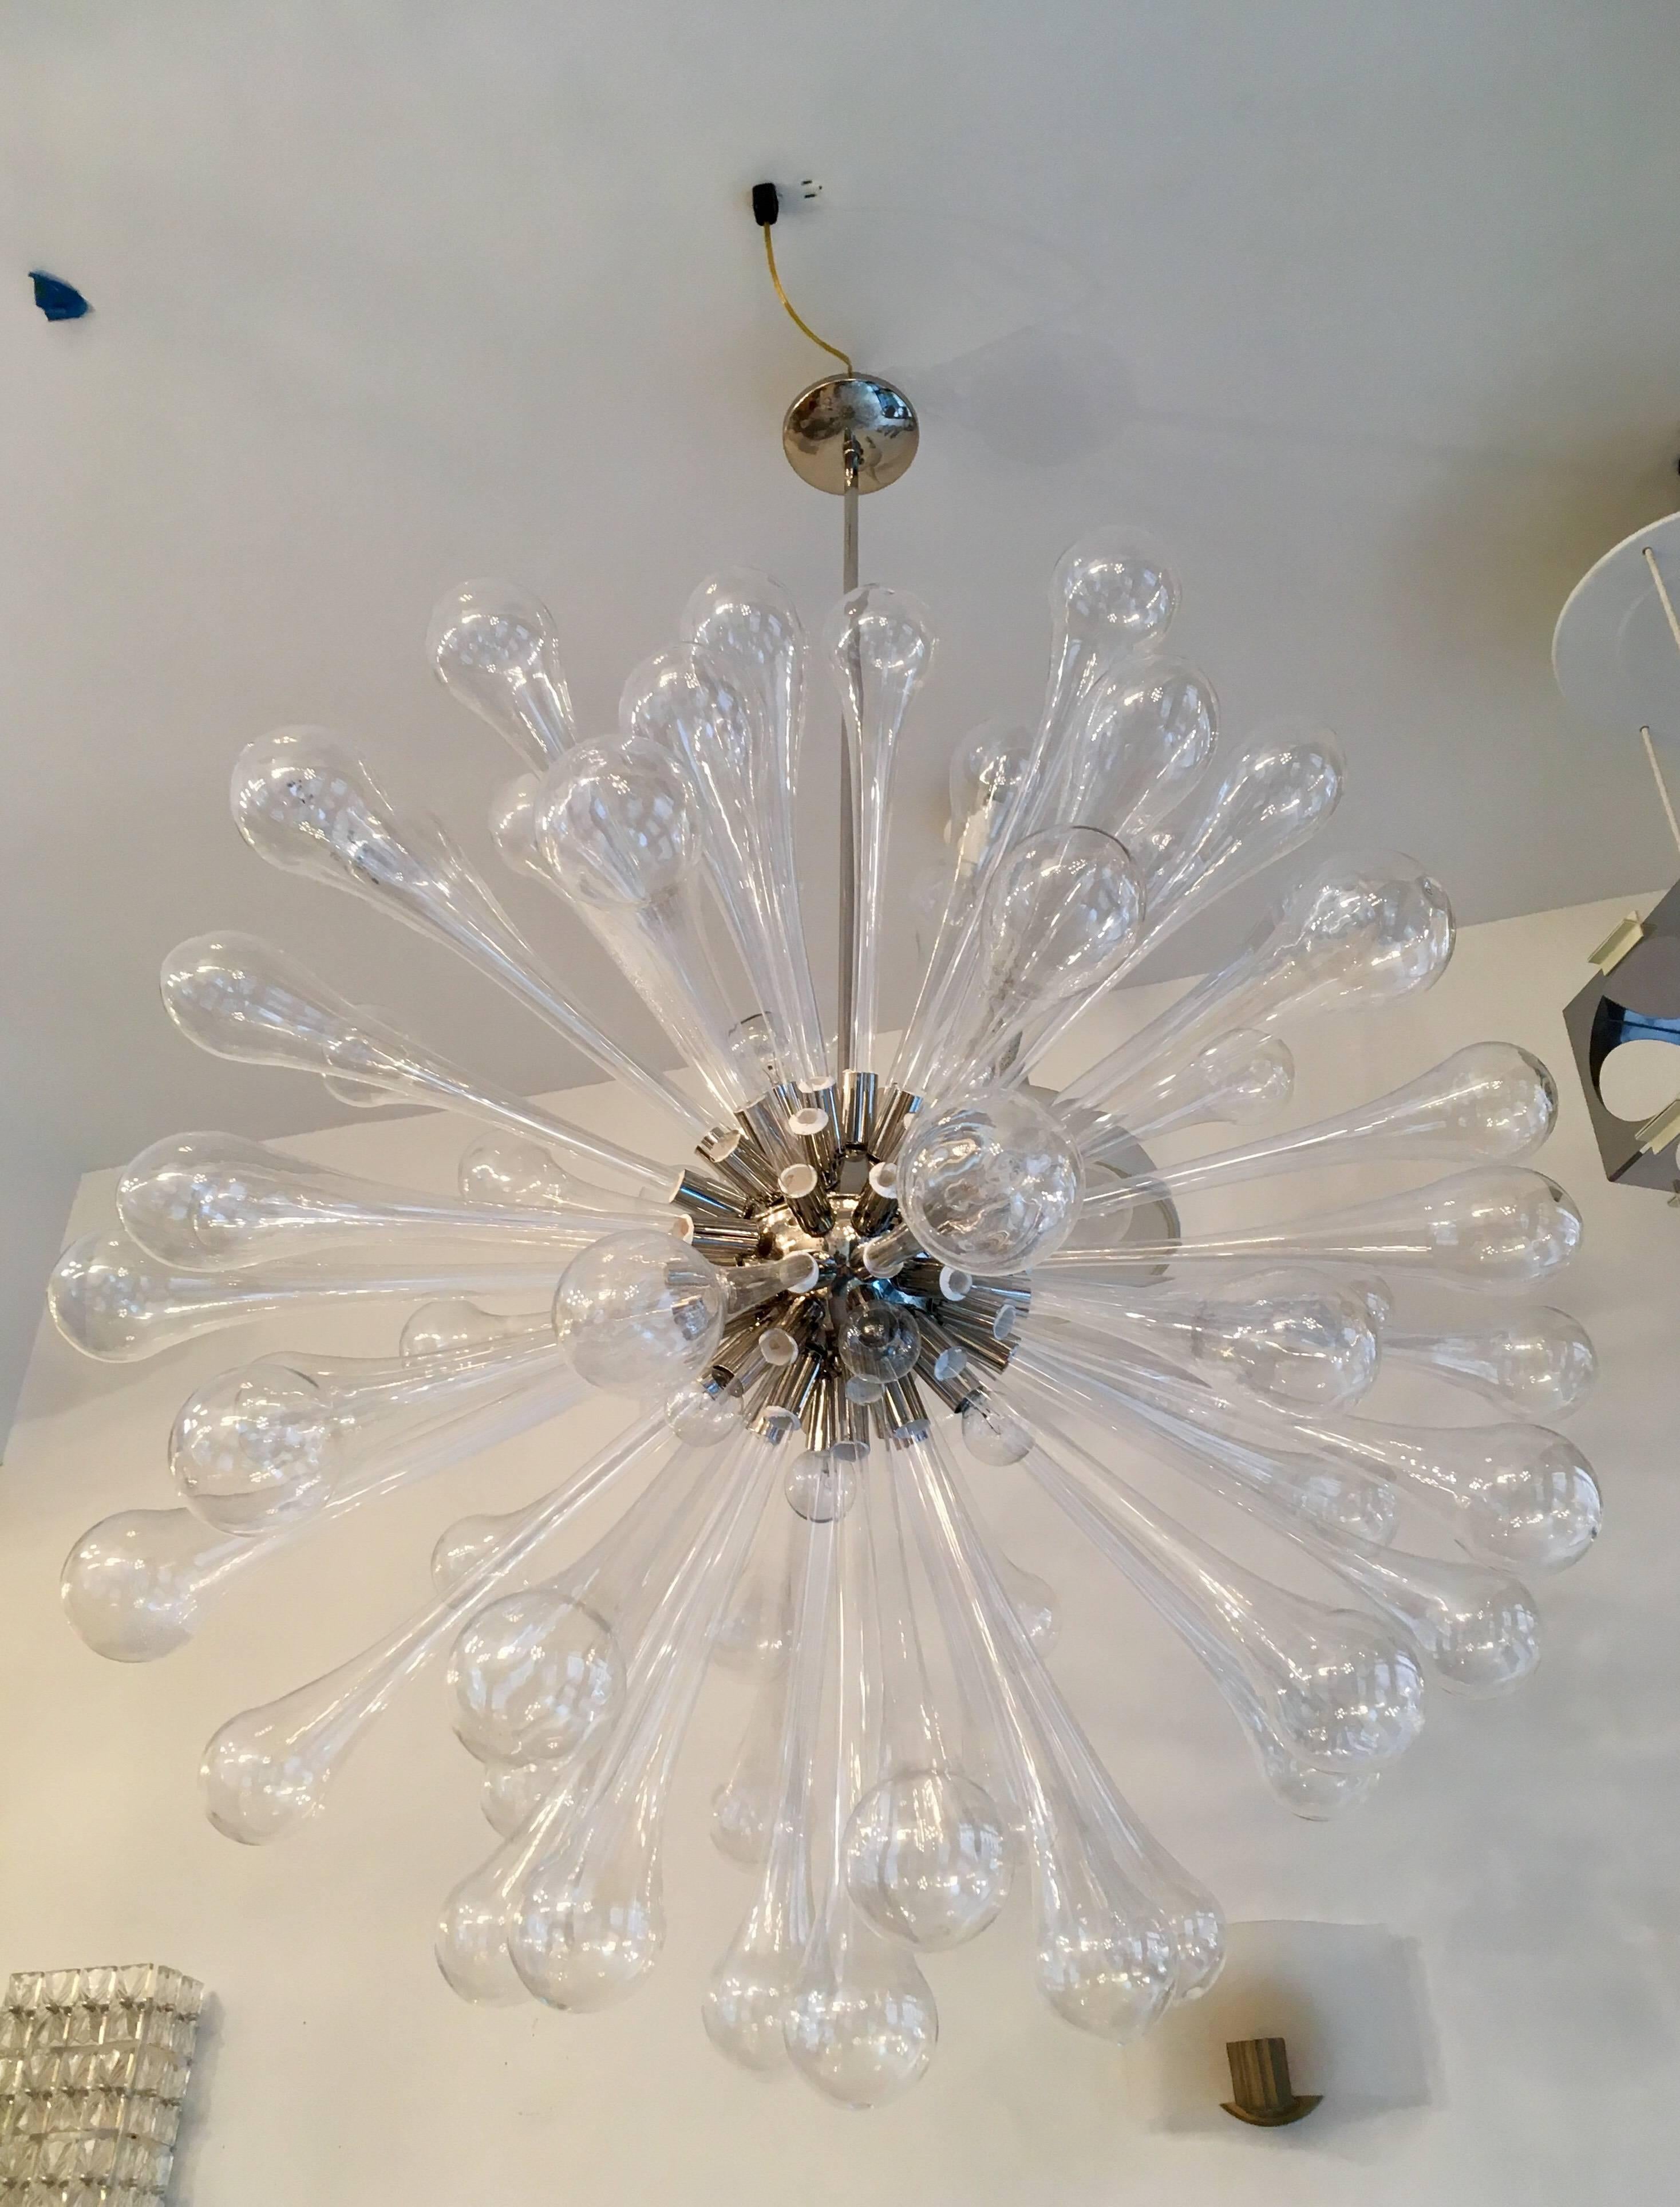 Grand Large 1960s Murano Glass Dandelion Sputnik Chandelier In Excellent Condition For Sale In New York, NY